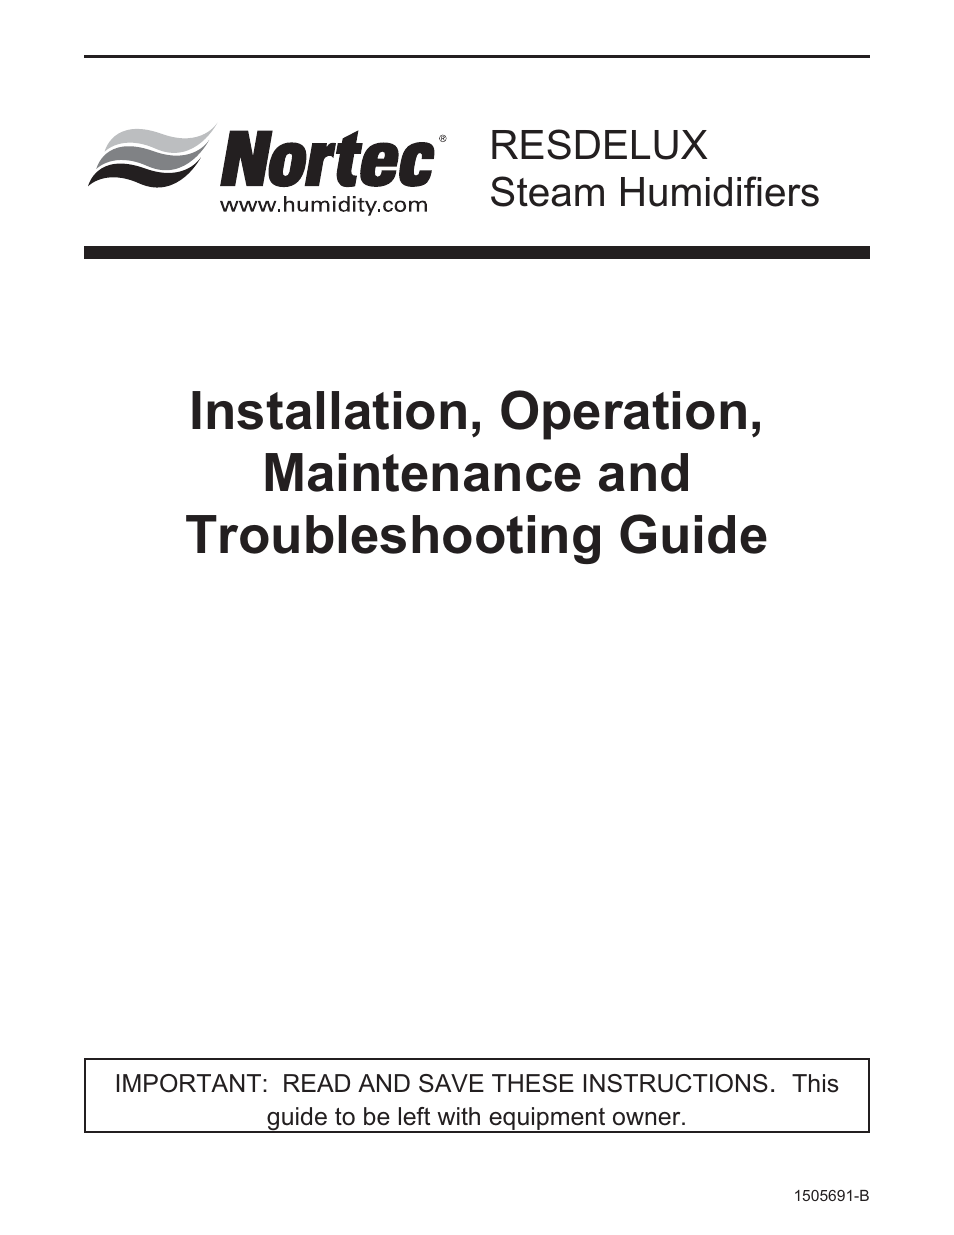 Nortec RESDELUX 1505691-B User Manual | 22 pages